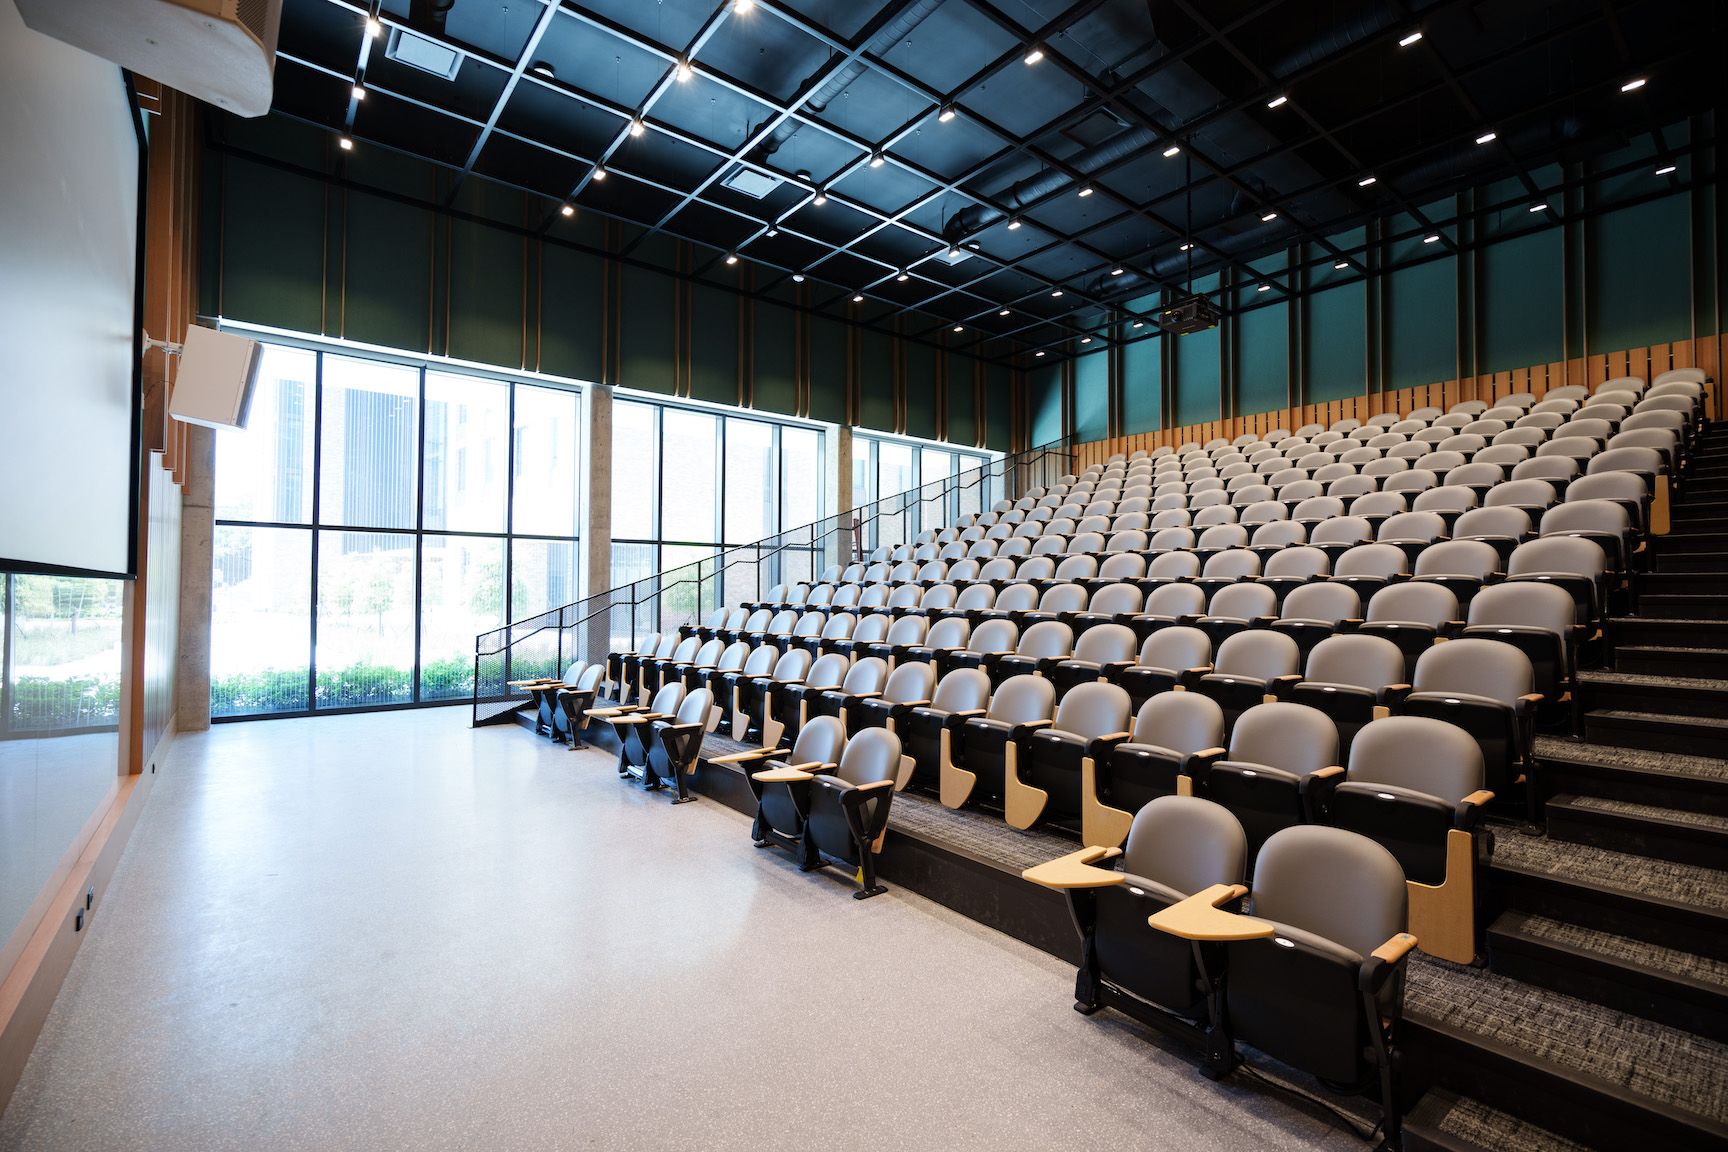 Theatre style lecture hall